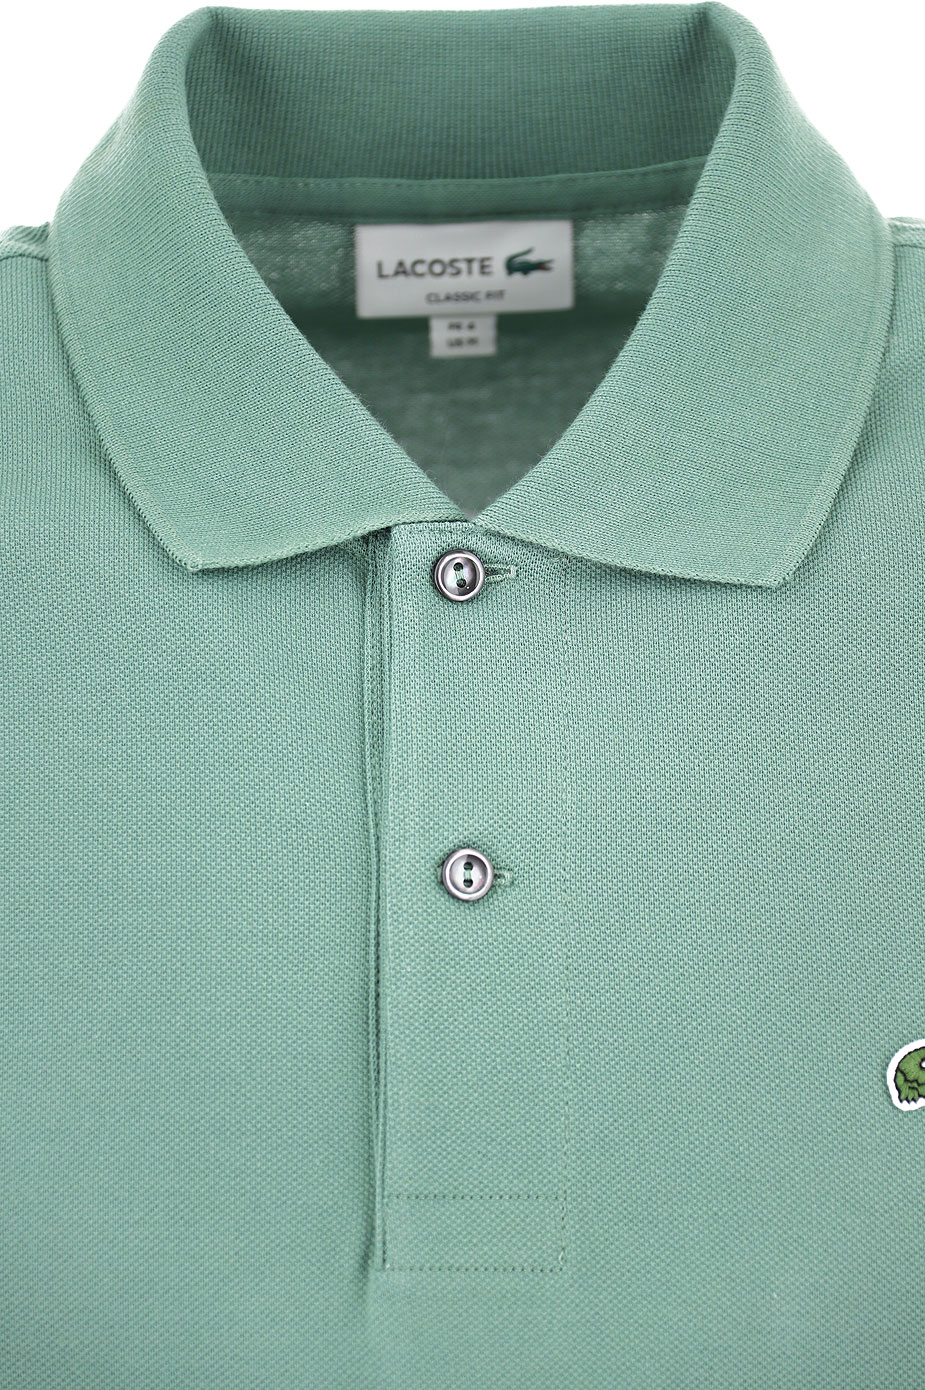 Mens Clothing Lacoste, Style code: l1212-kx5-